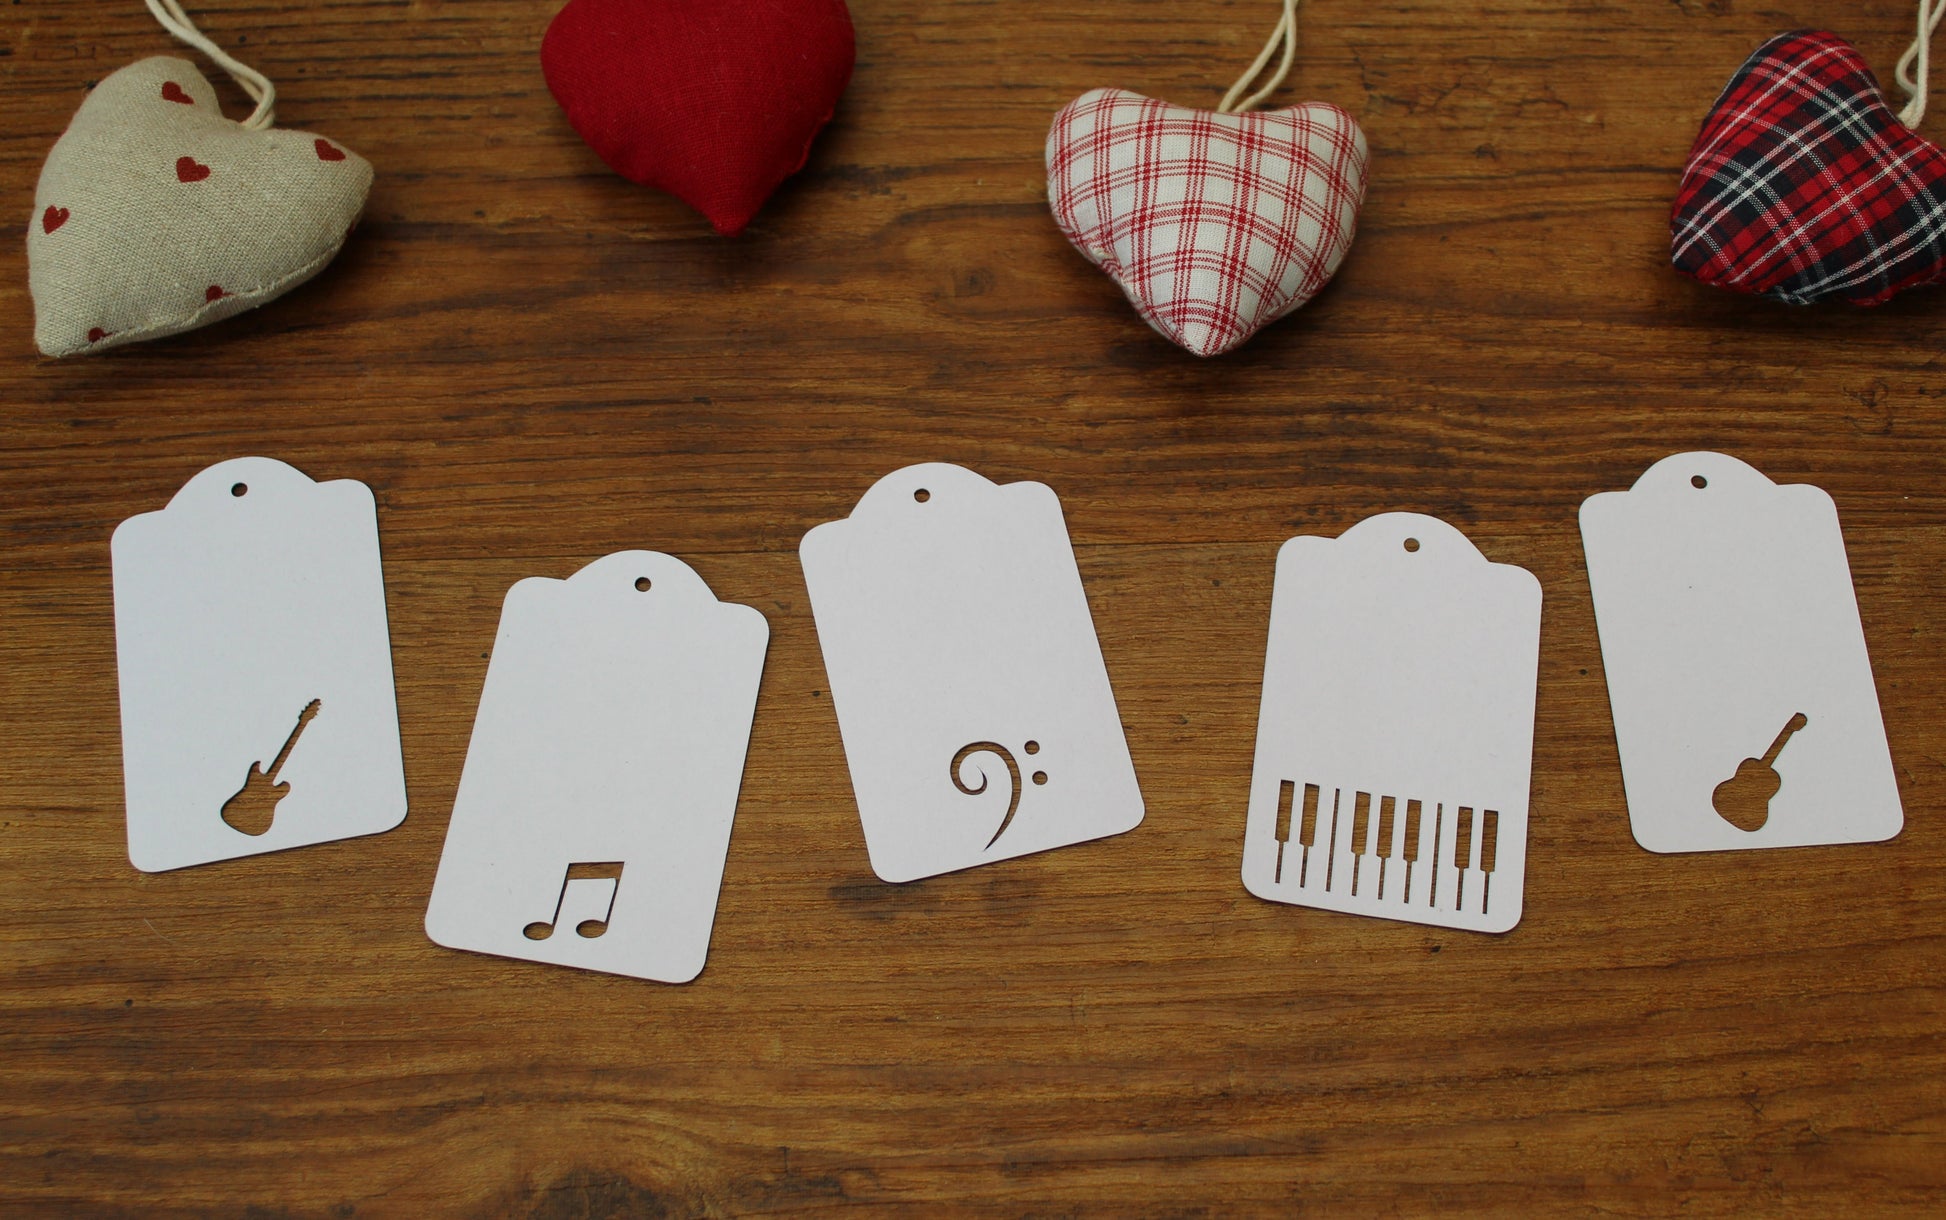 White tags displayed on a wooden background with red hearts around.